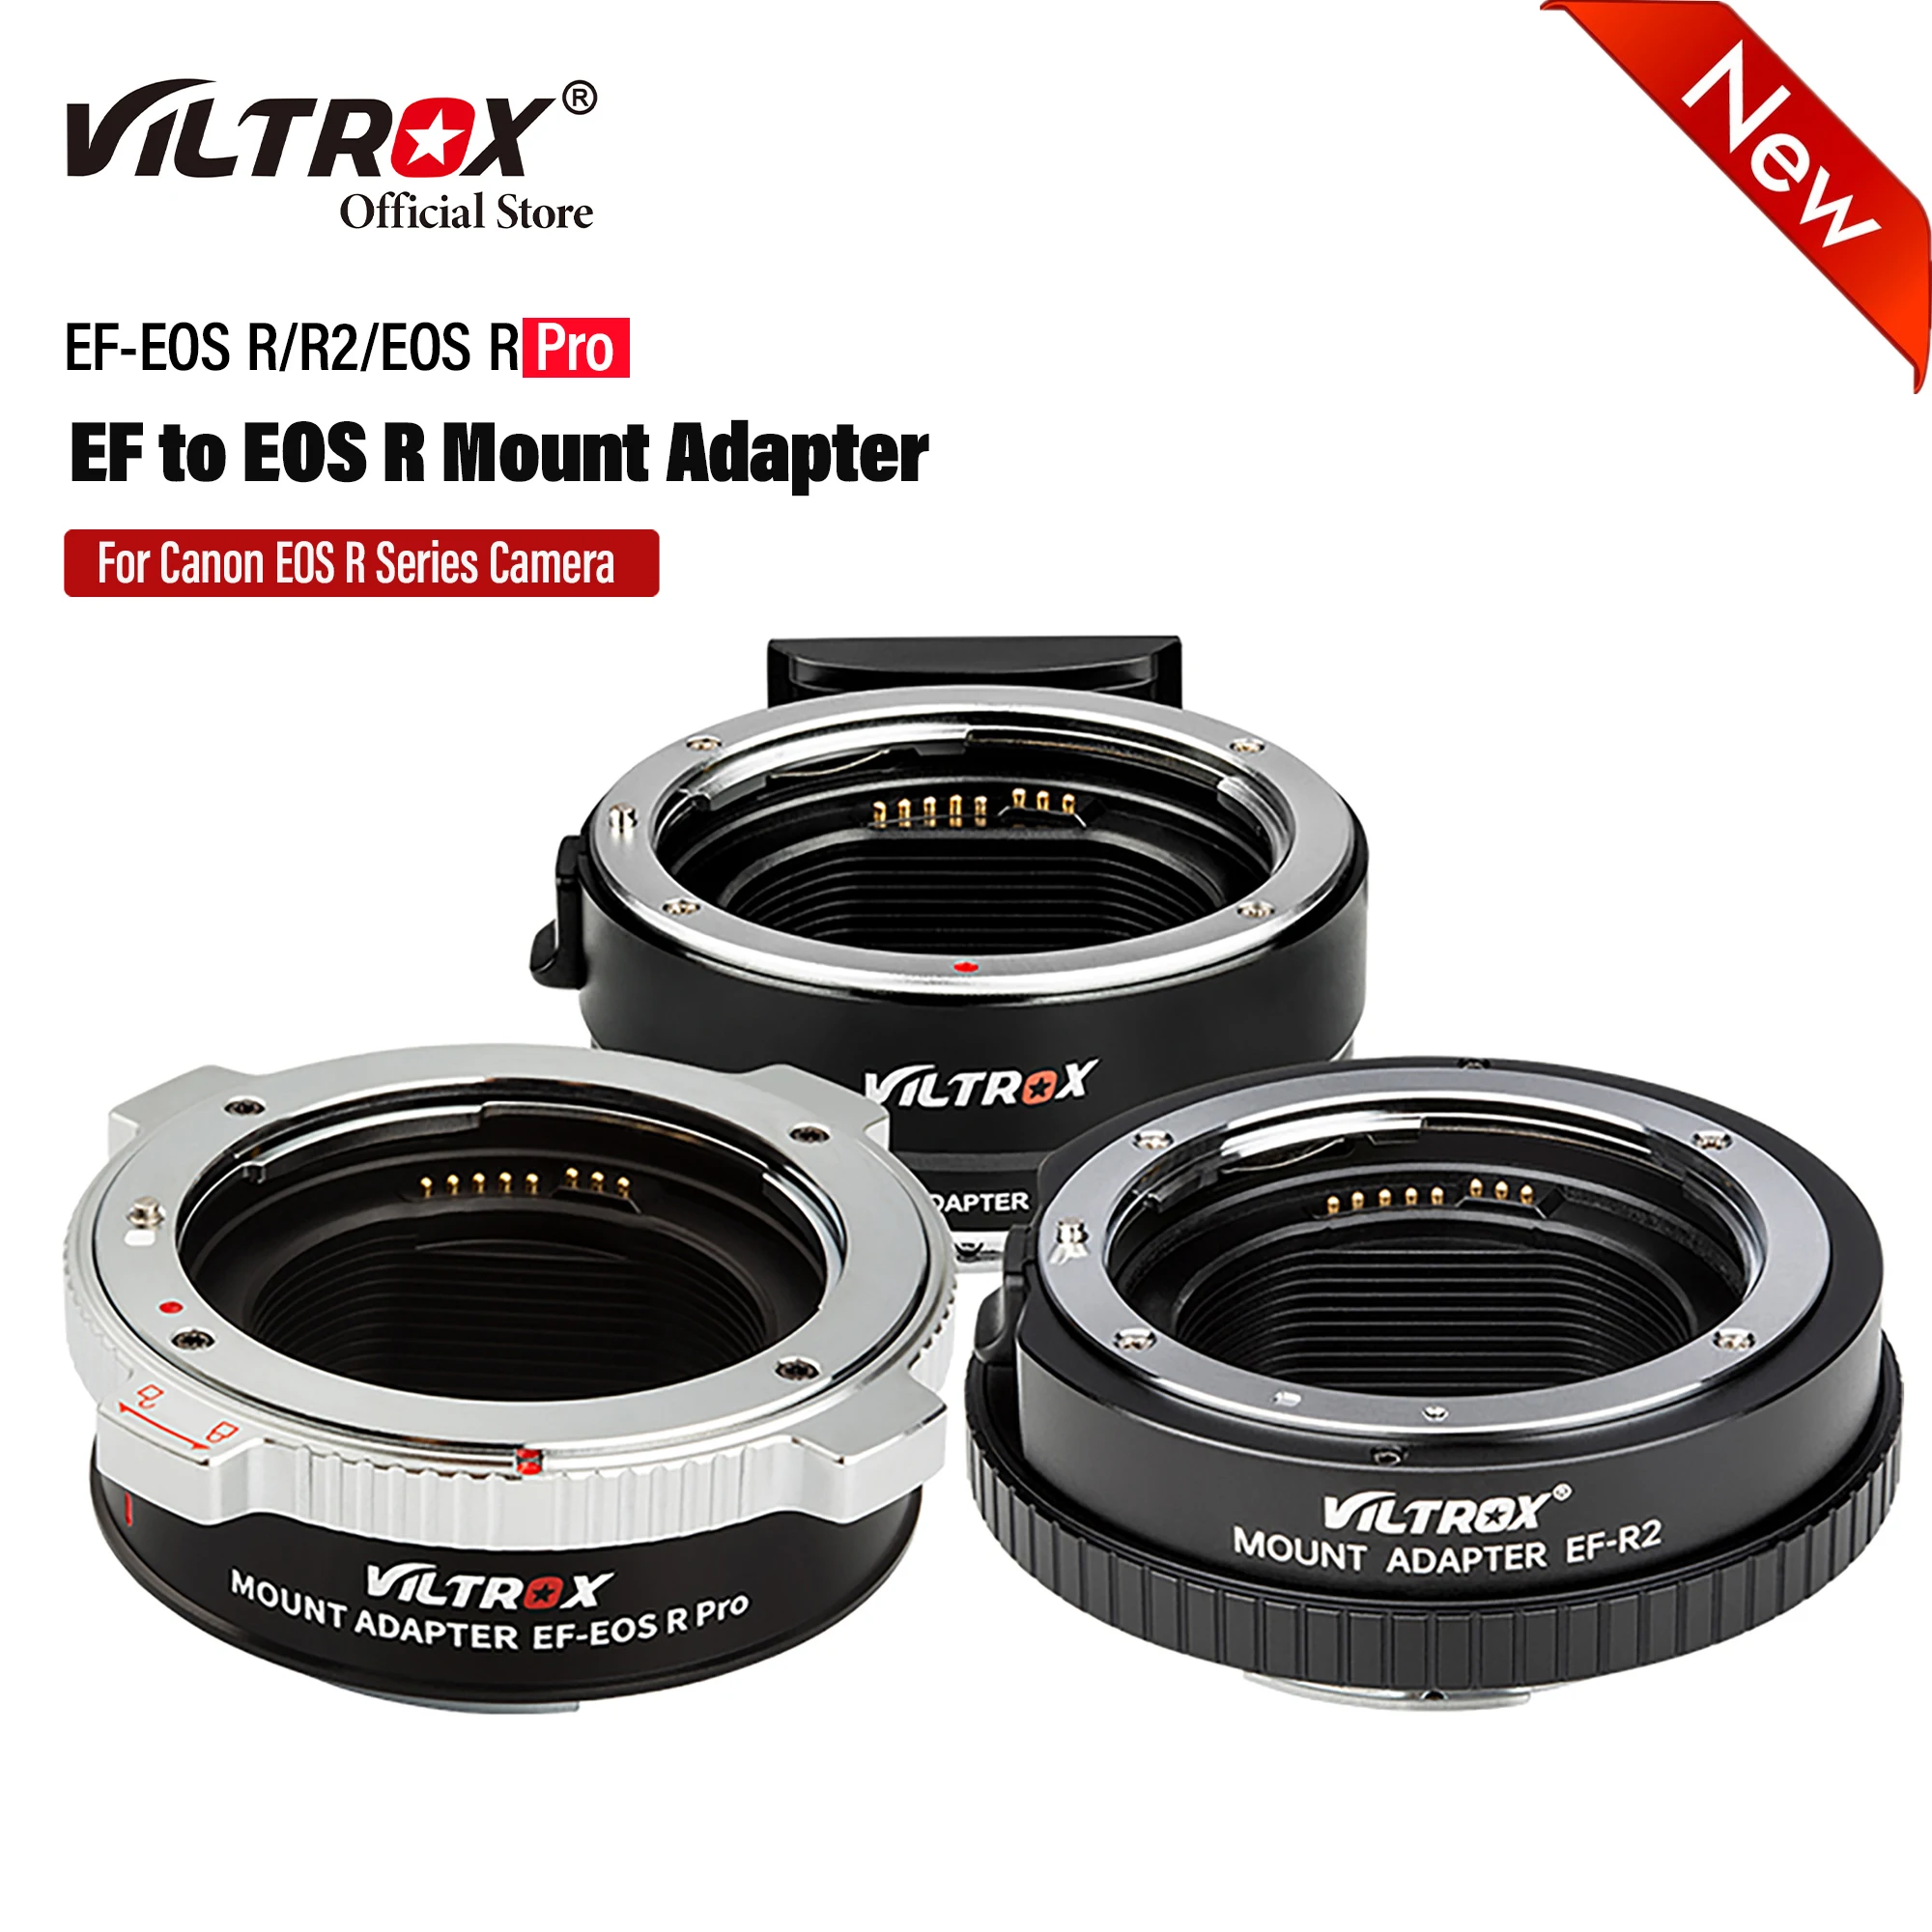 Viltrox EF-EOS R PRO Auto Focus Full Frame Lens Adapter Control Ring for Canon EOS EF Lens to R Mount Camera R RP R3 R5C R6 C70